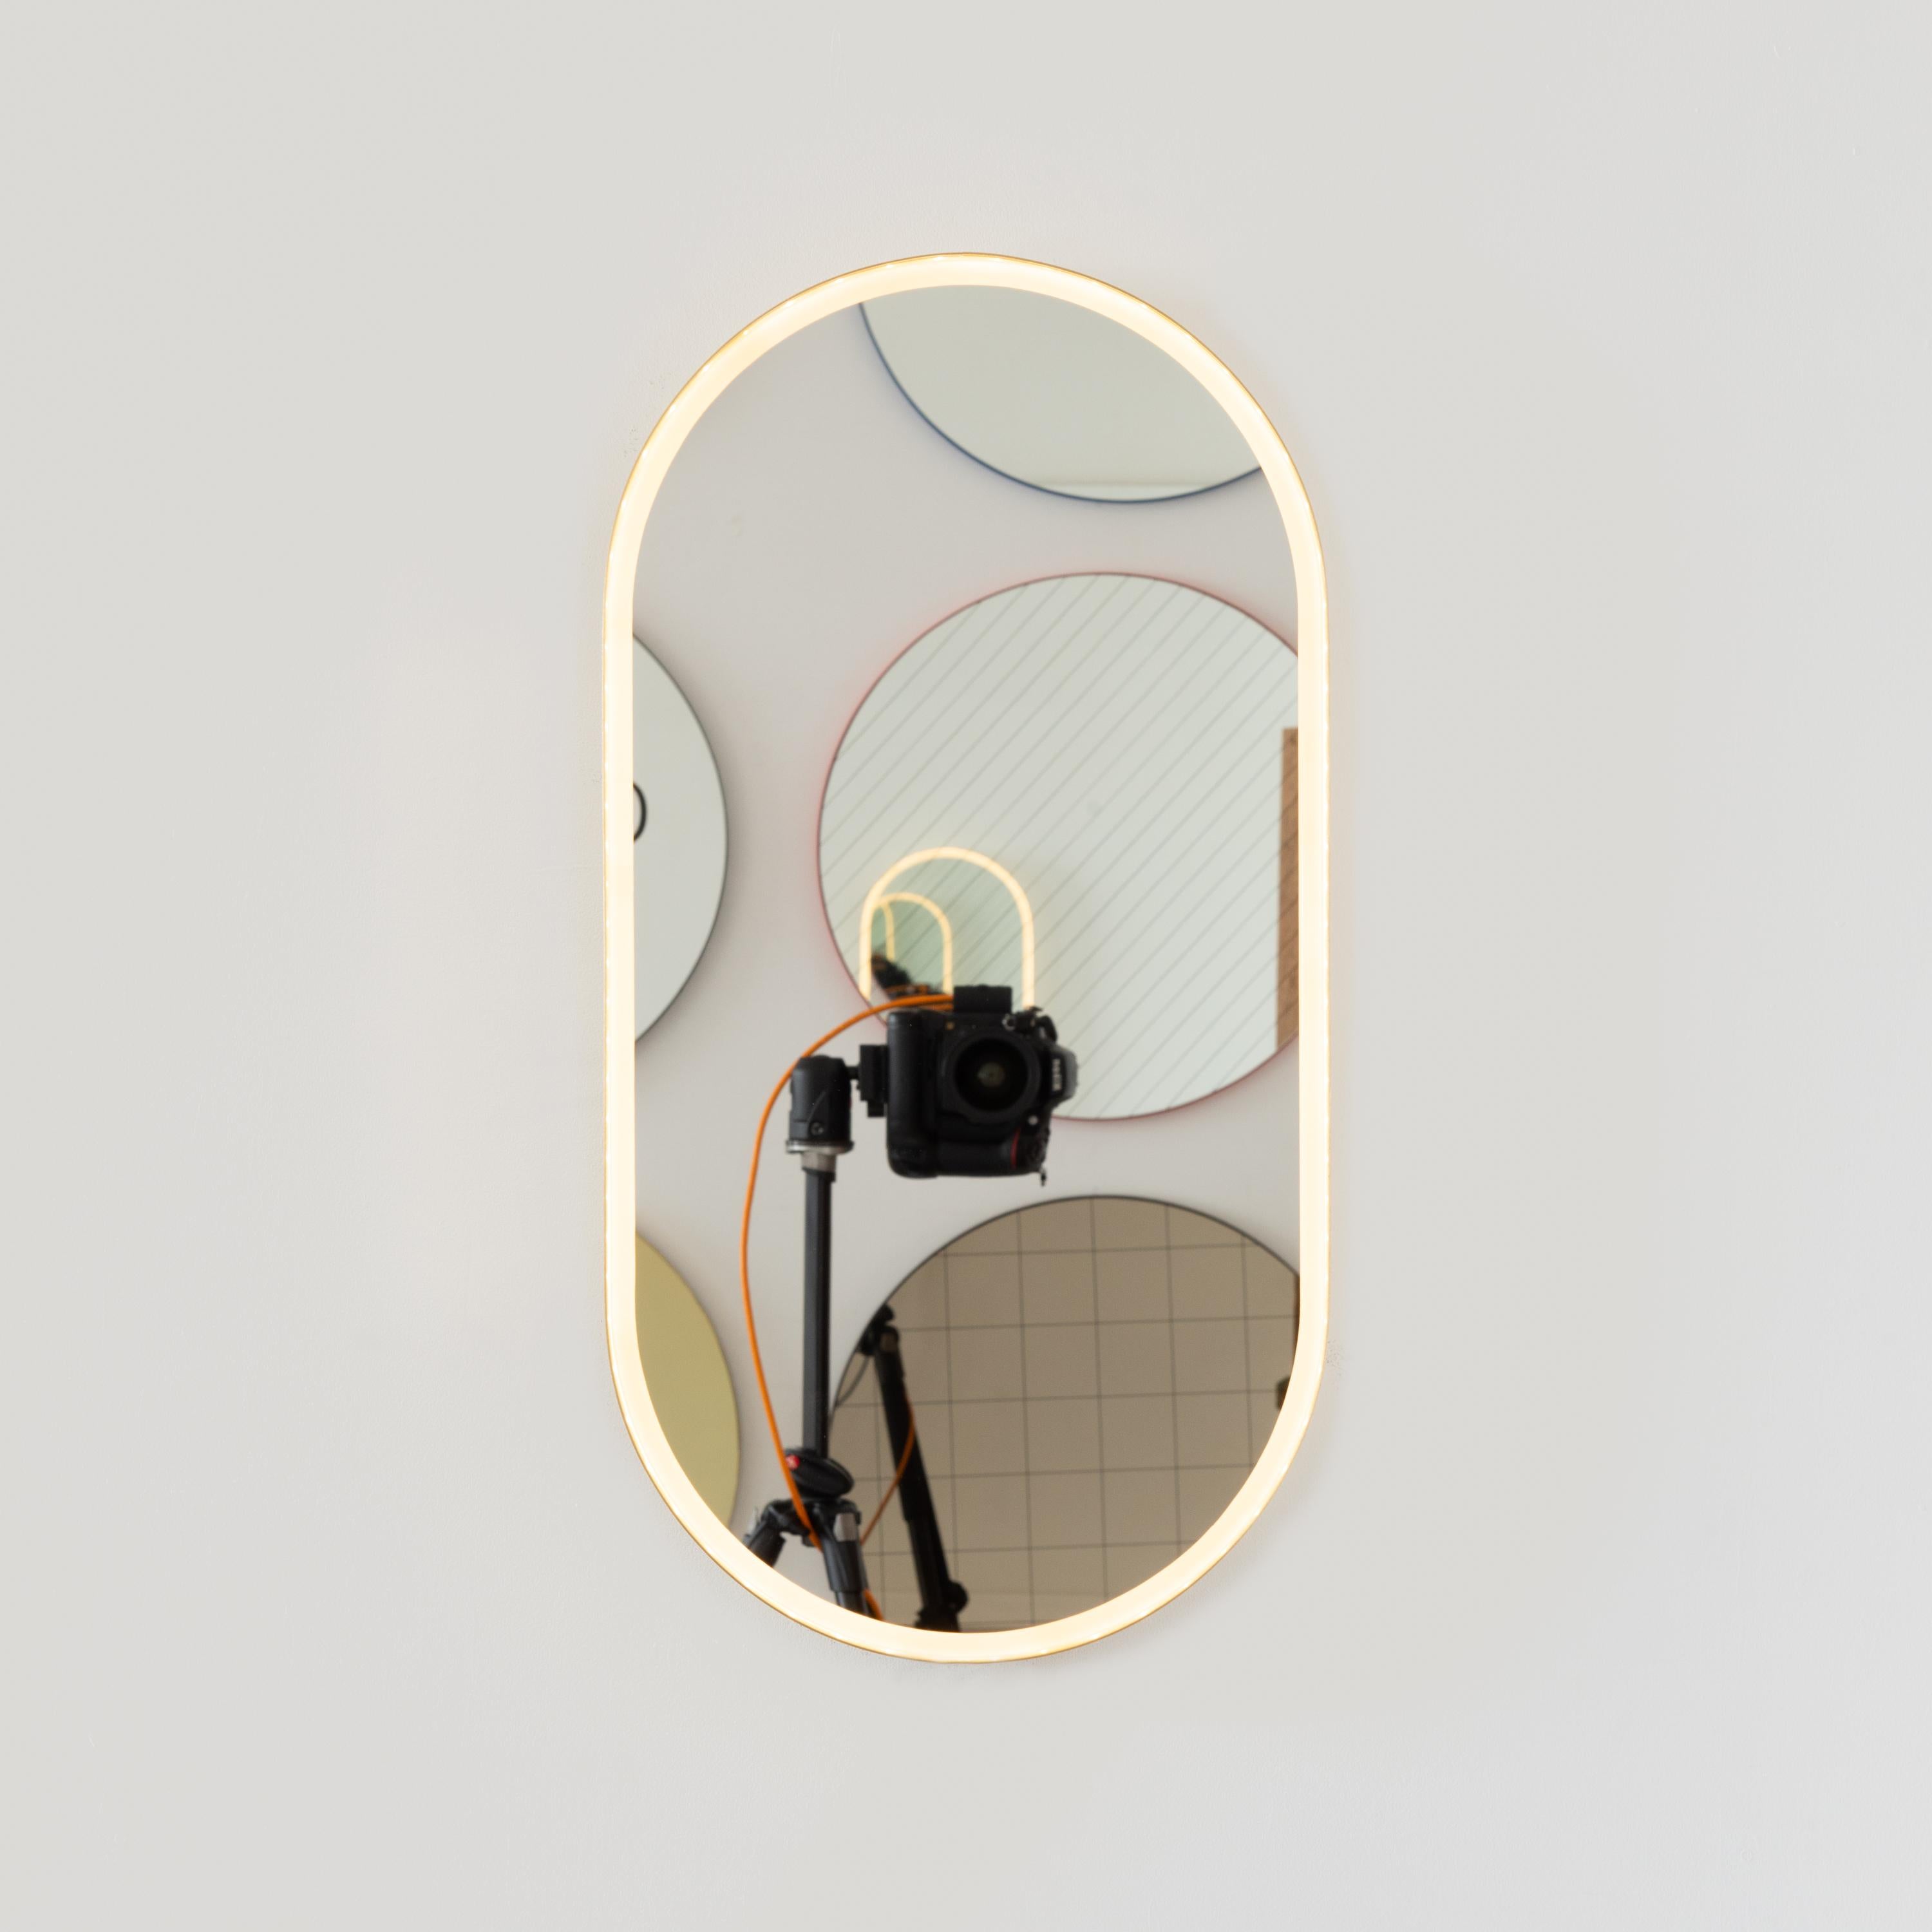 Modern handcrafted front illuminated capsule / pill shaped mirror with an elegant brushed brass frame. Designed and handcrafted in London, UK.

Our mirrors are designed with an integrated French cleat (split batten) system that ensures the mirror is